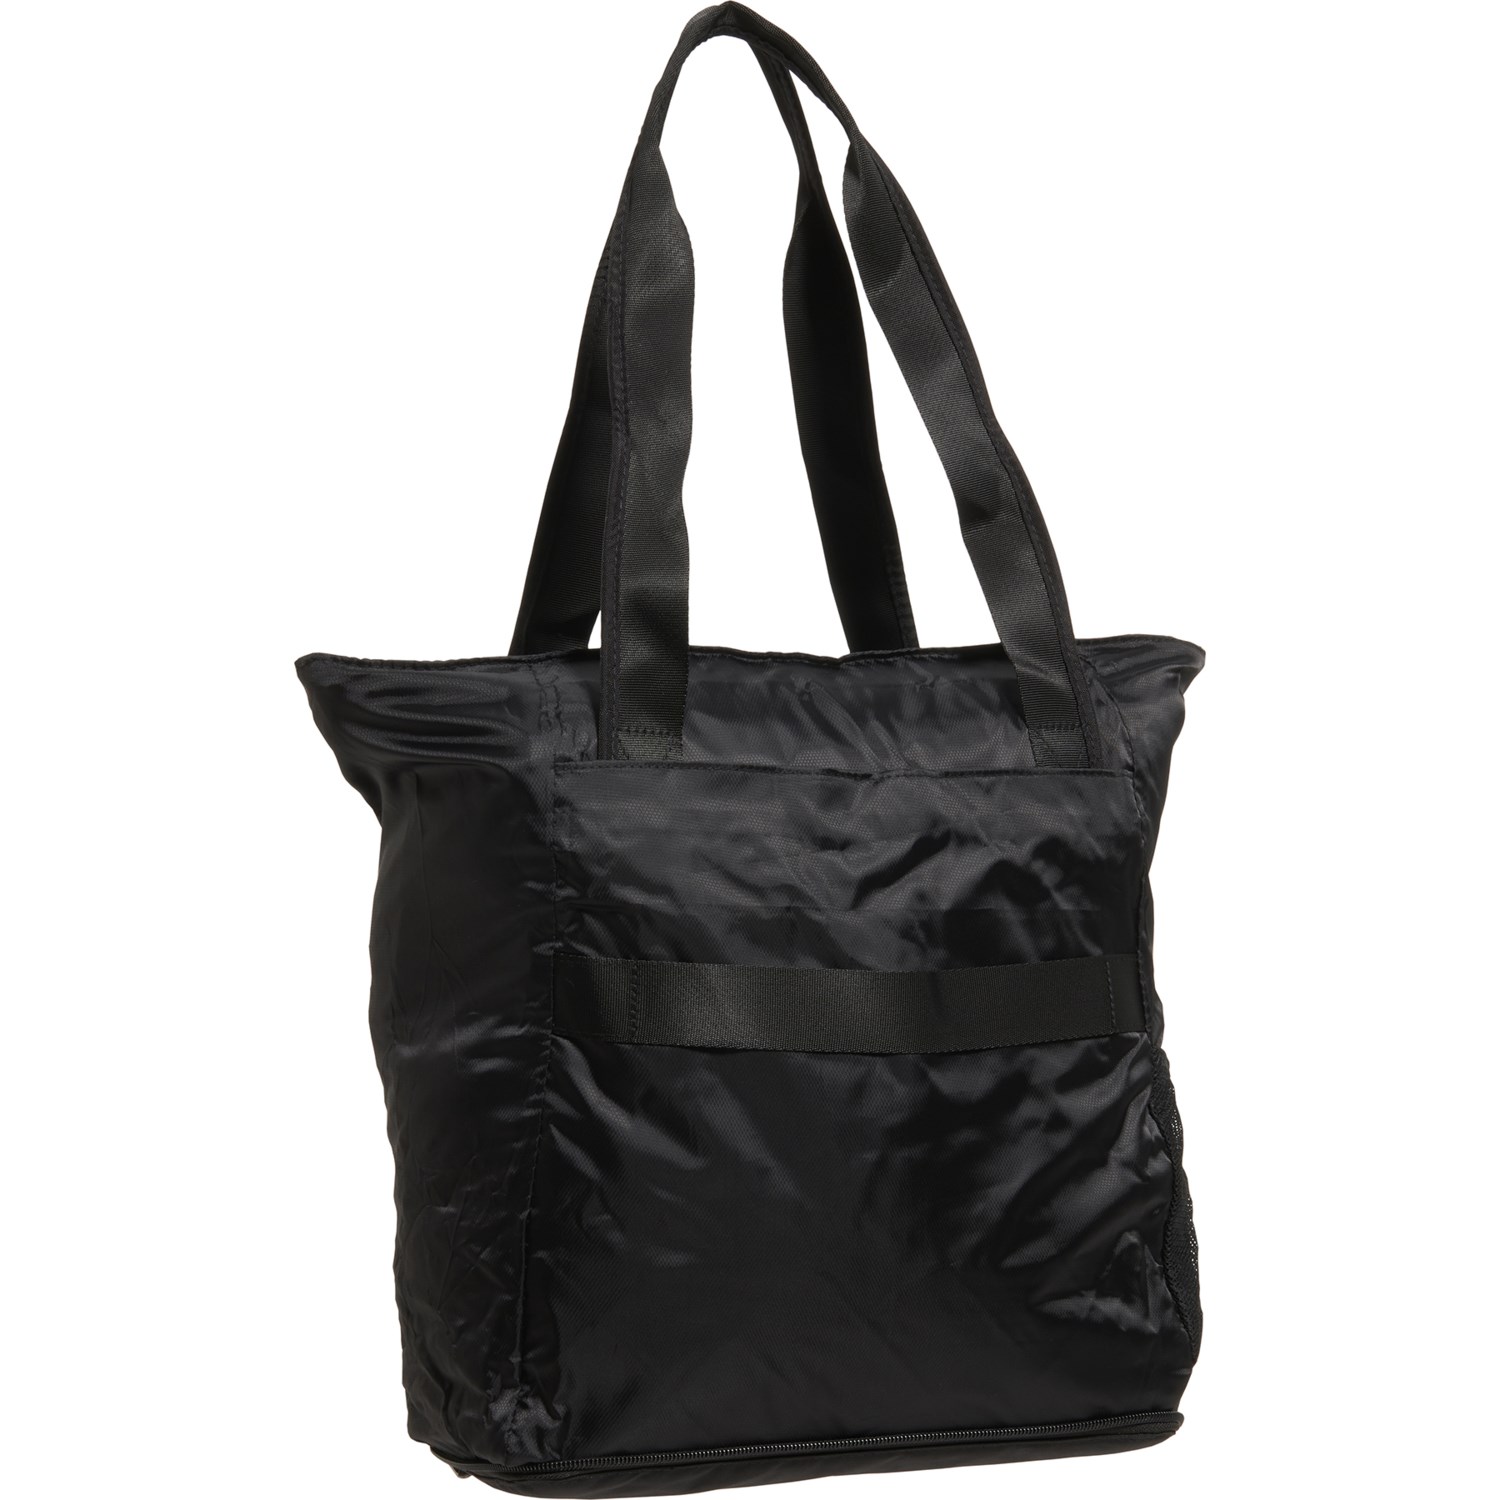 Travelon Anti-Theft Active Packable Tote Bag (For Women) - Save 60%